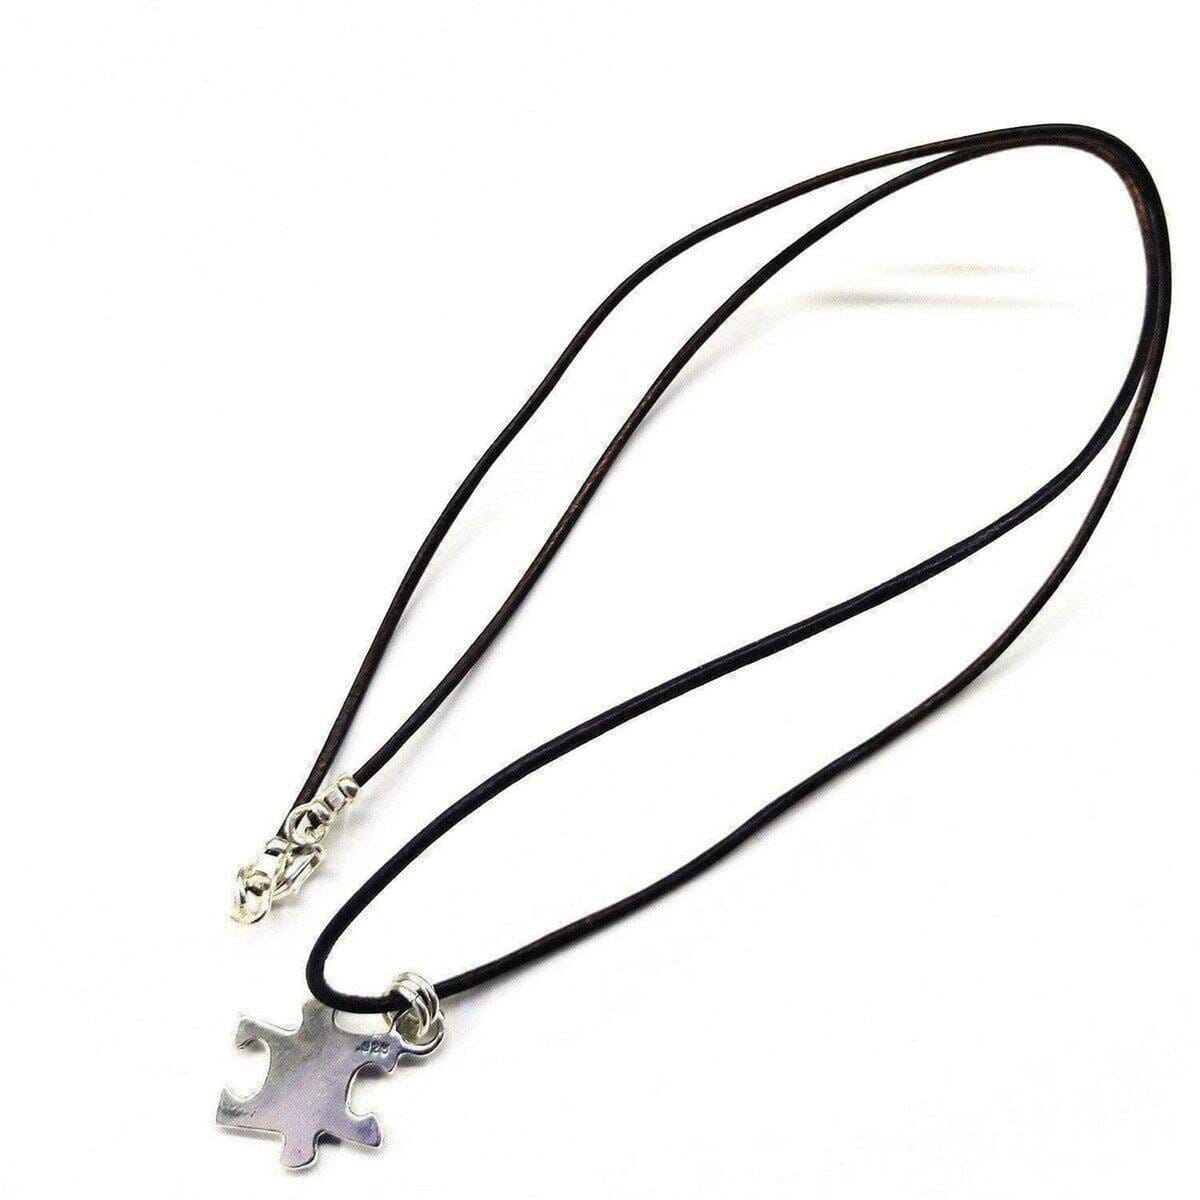 Double Puzzle Piece Autism Awareness CZ Silver Stainless Steel Pendant  Necklace | eBay